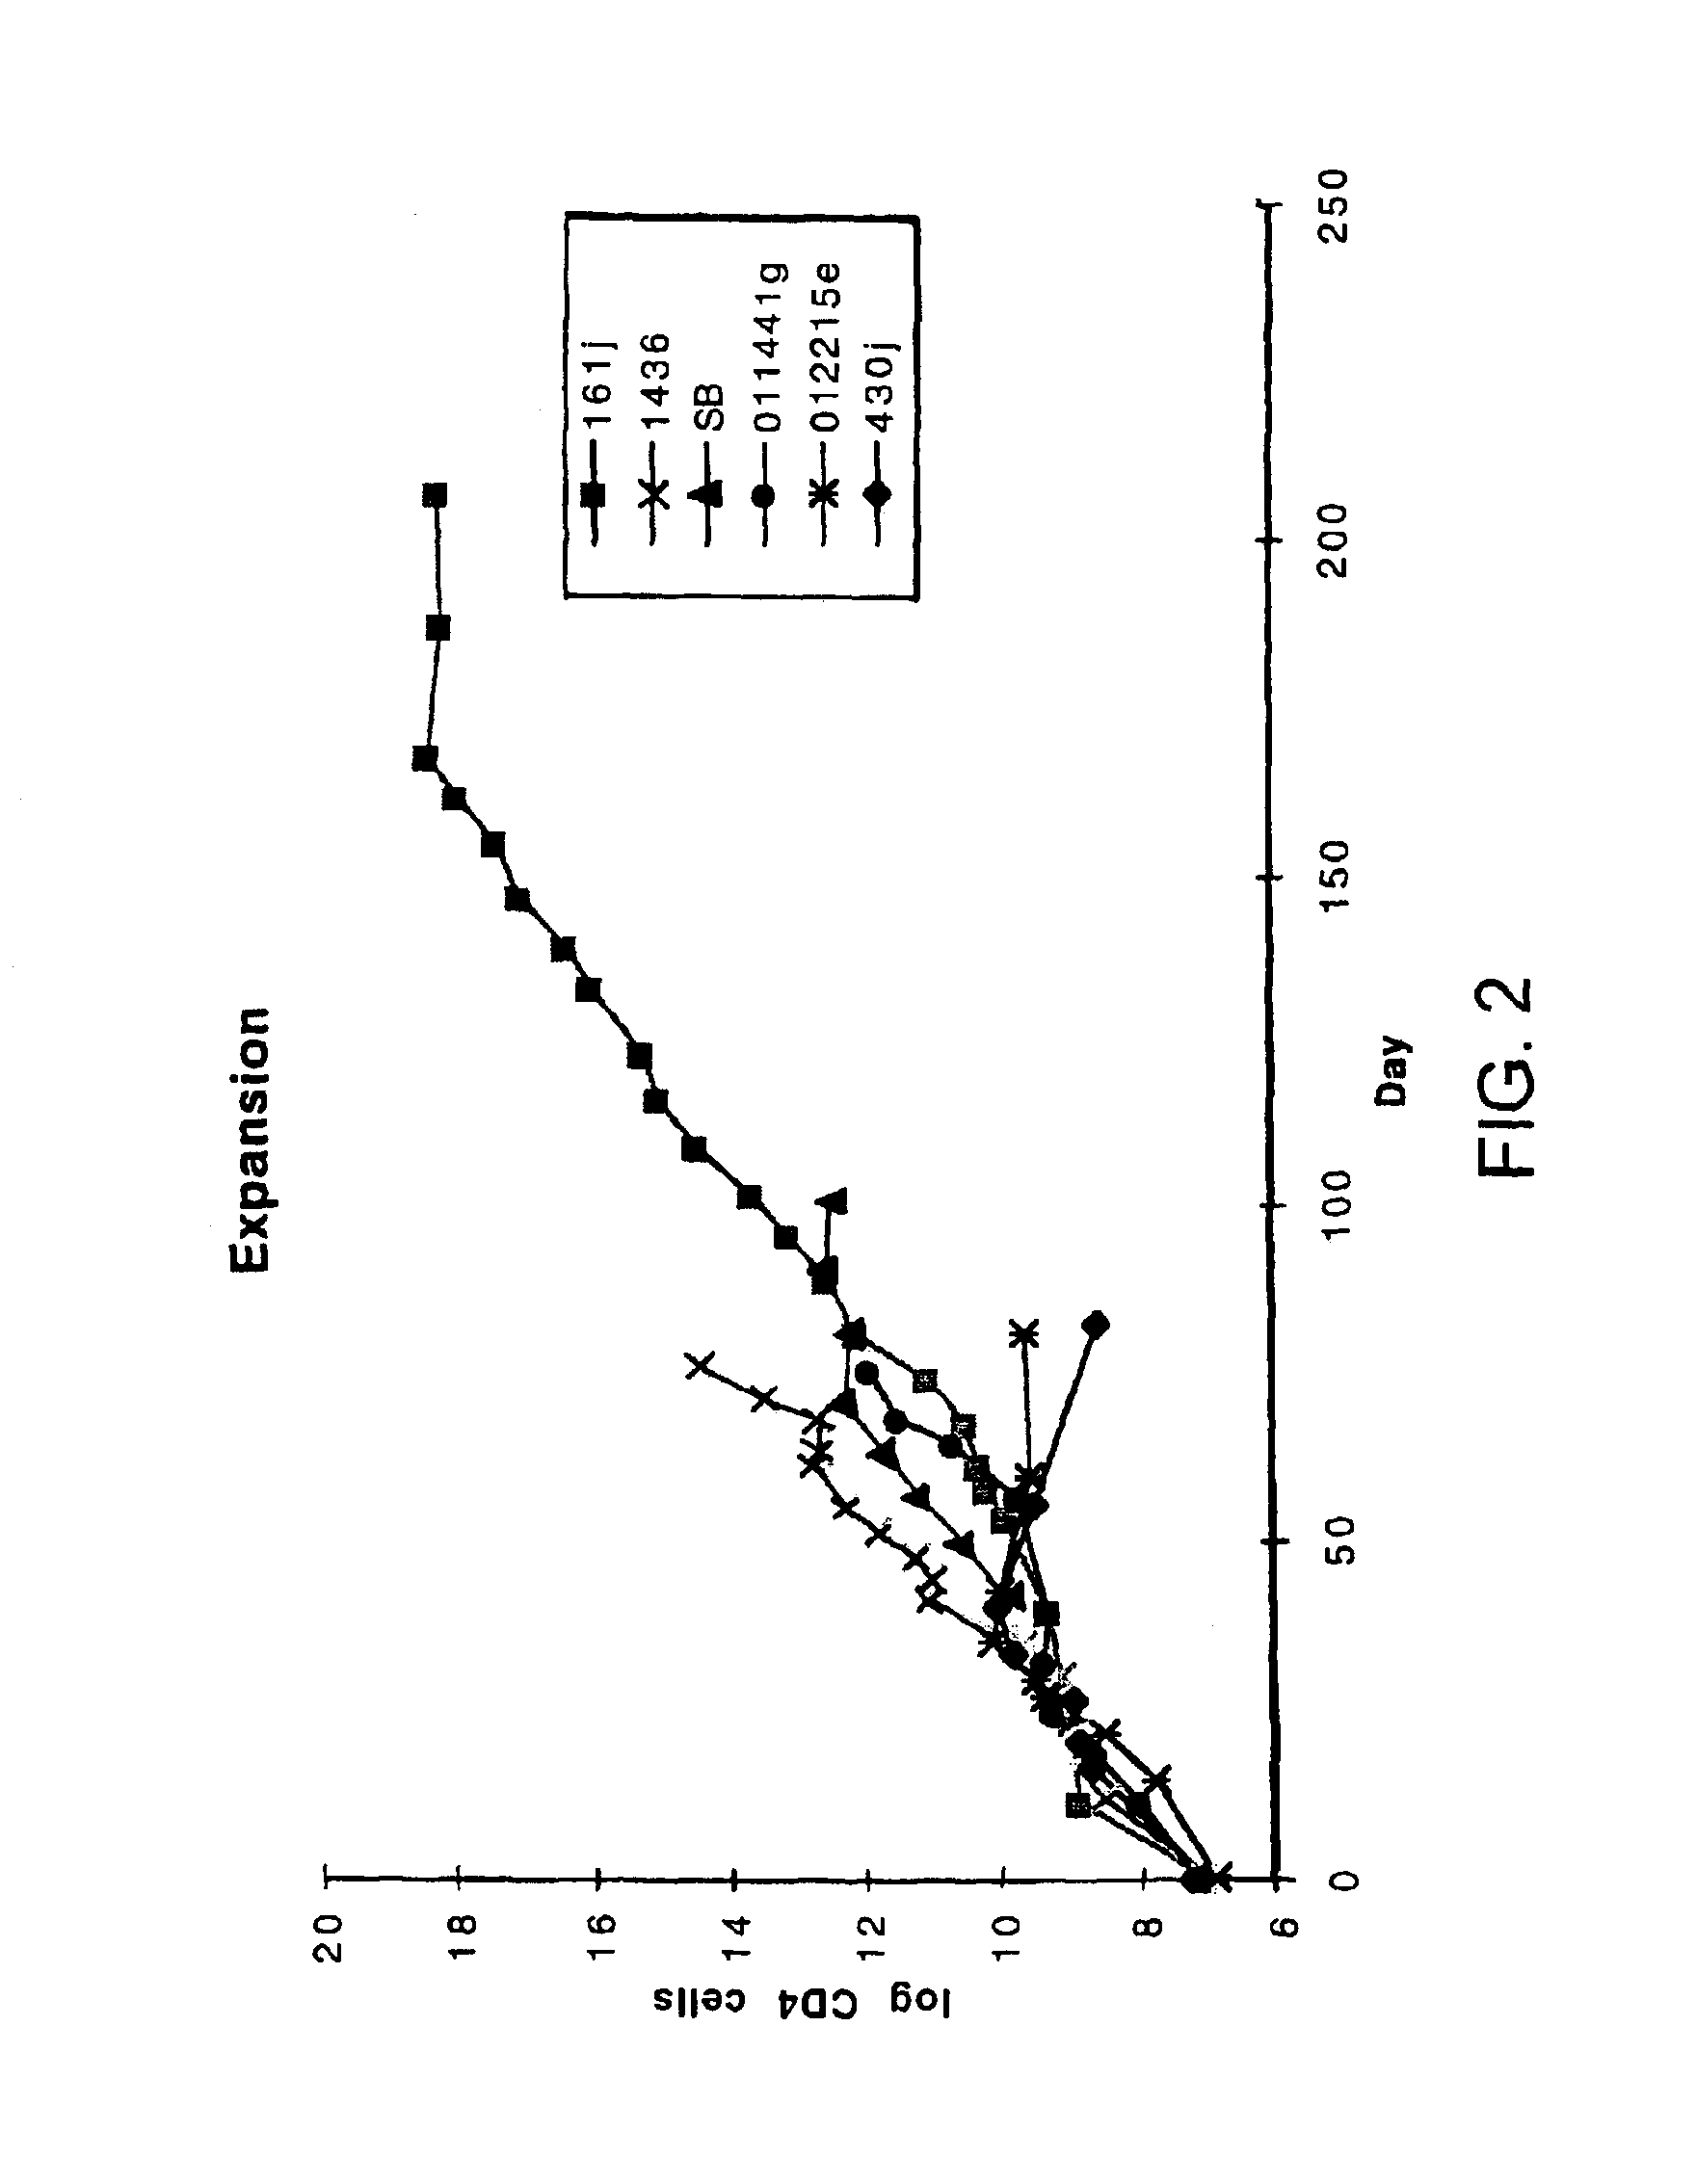 Methods for treatment of HIV and other infections using a T-cell or viral activator and anti-retroviral combination therapy